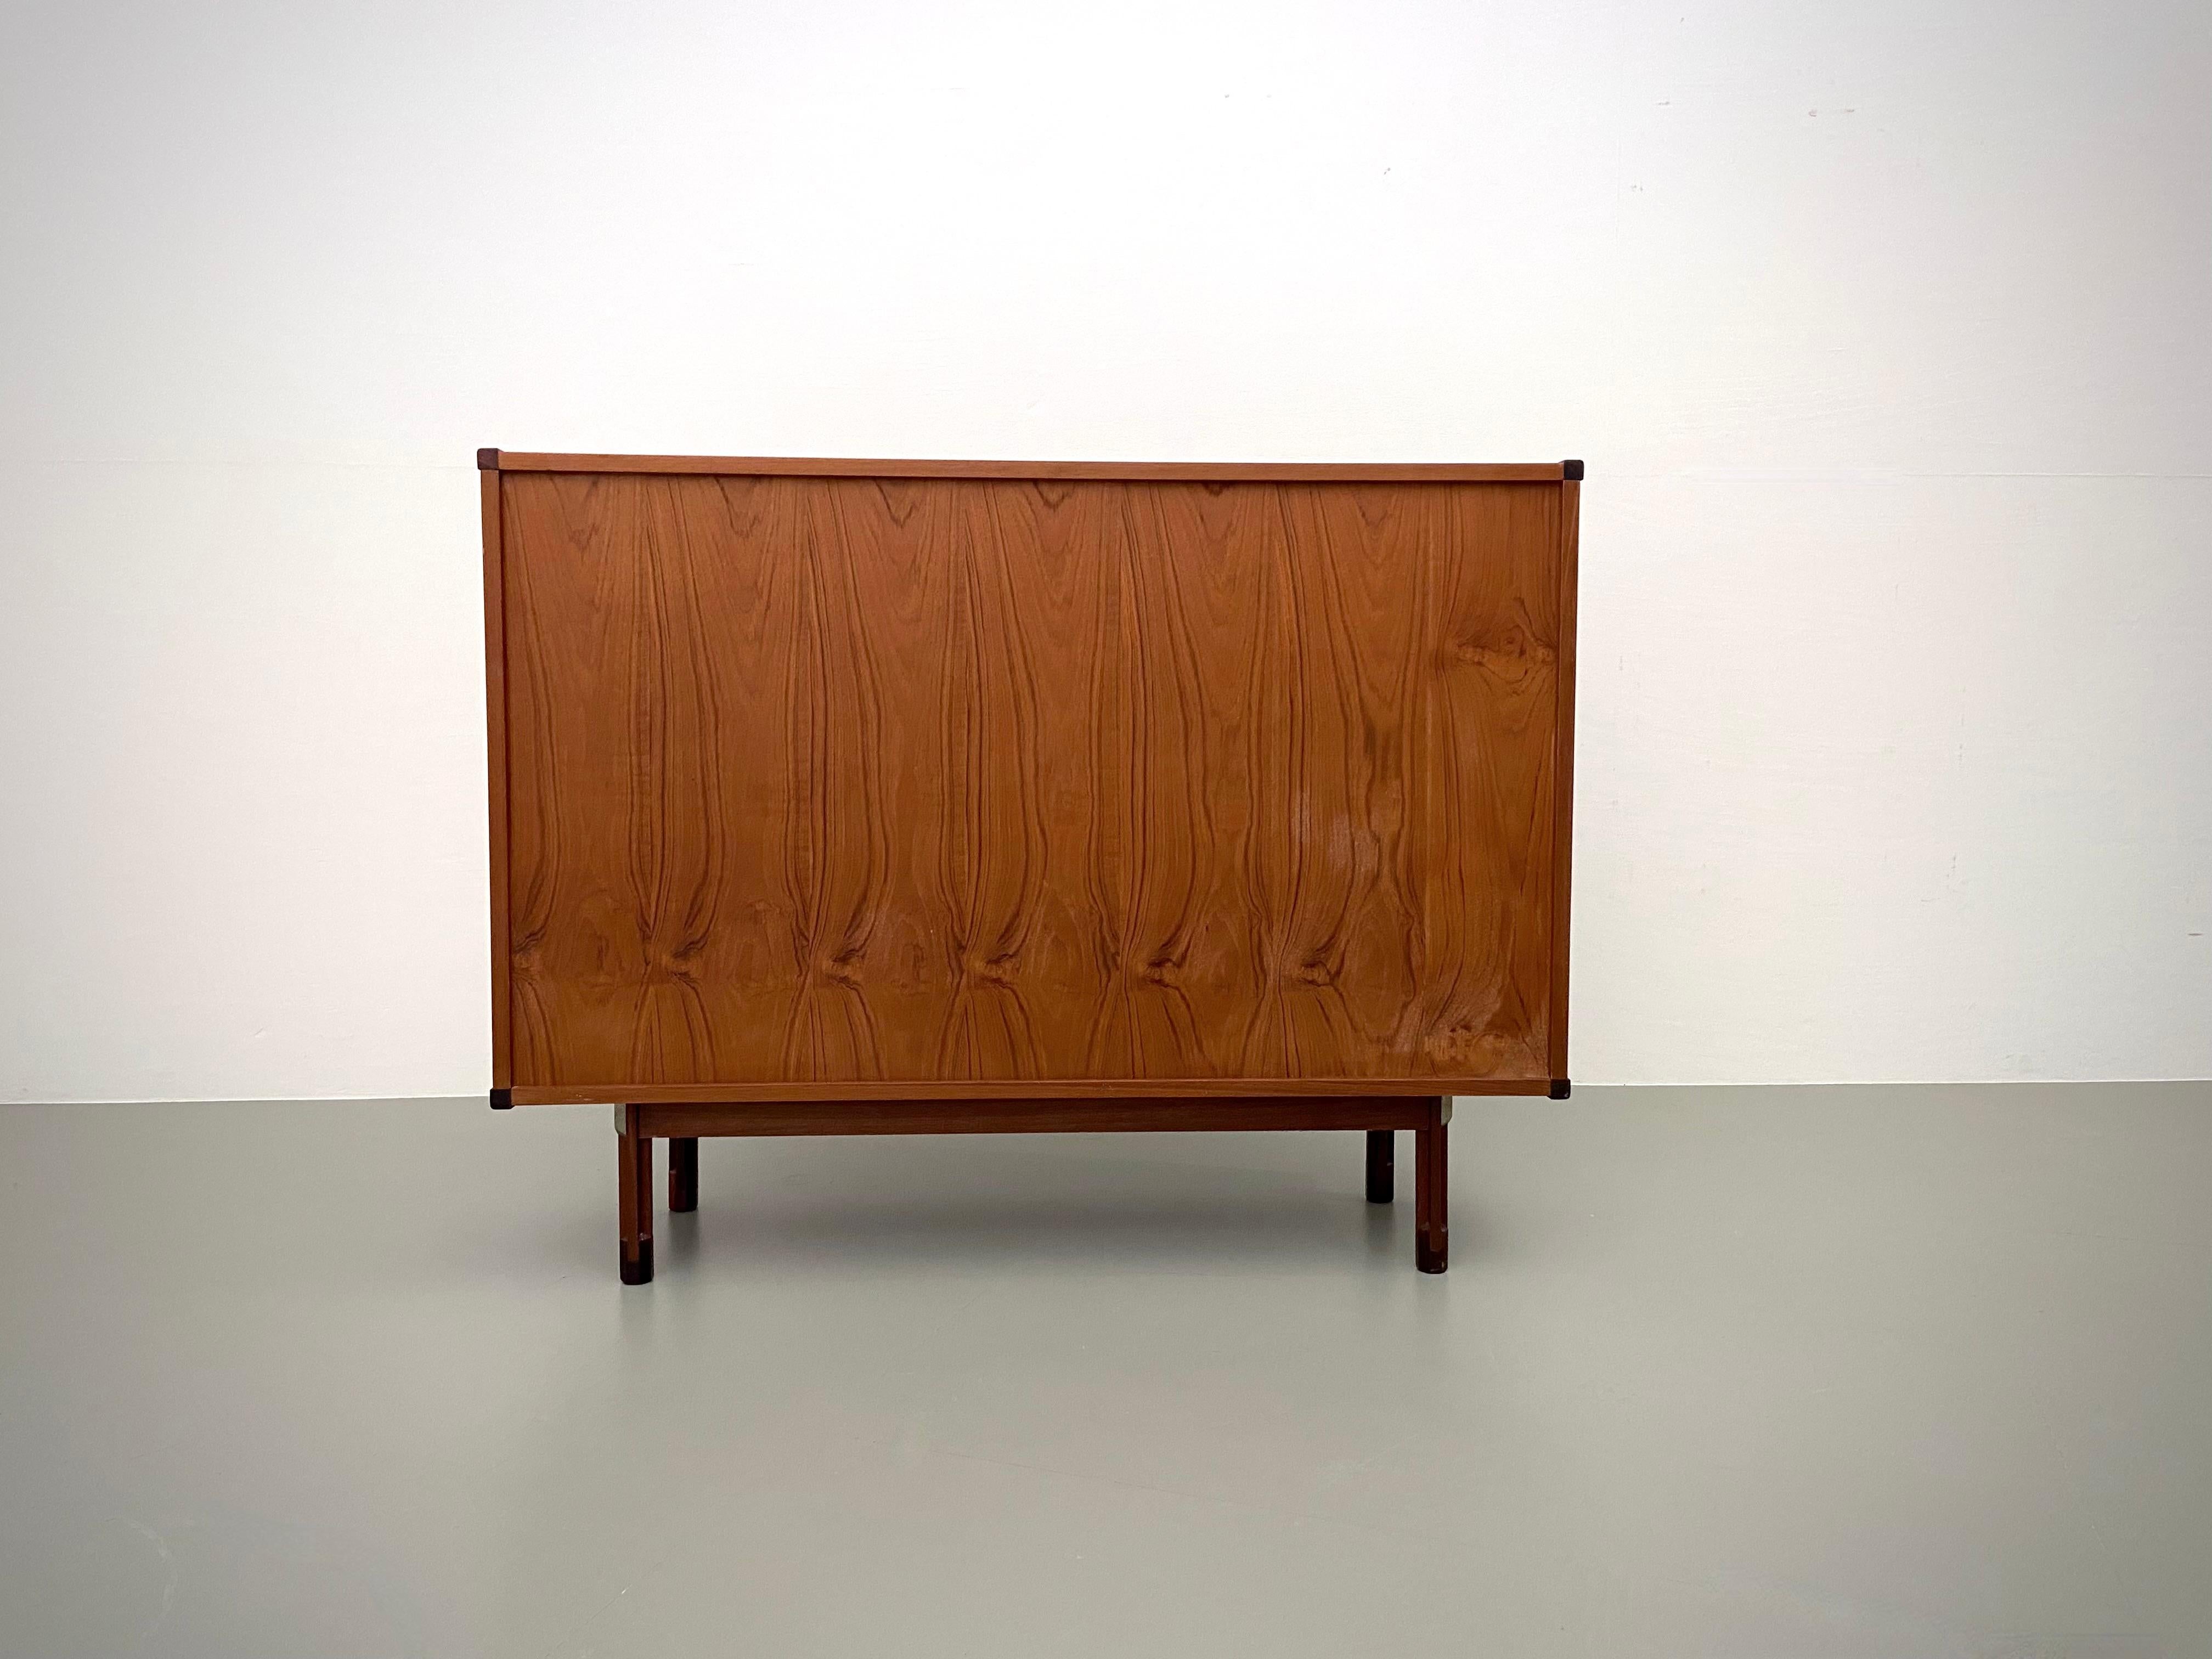 High Credenza by Pierro Ranzani for Elam in Laminate, Teak and Metal, 1962 For Sale 6